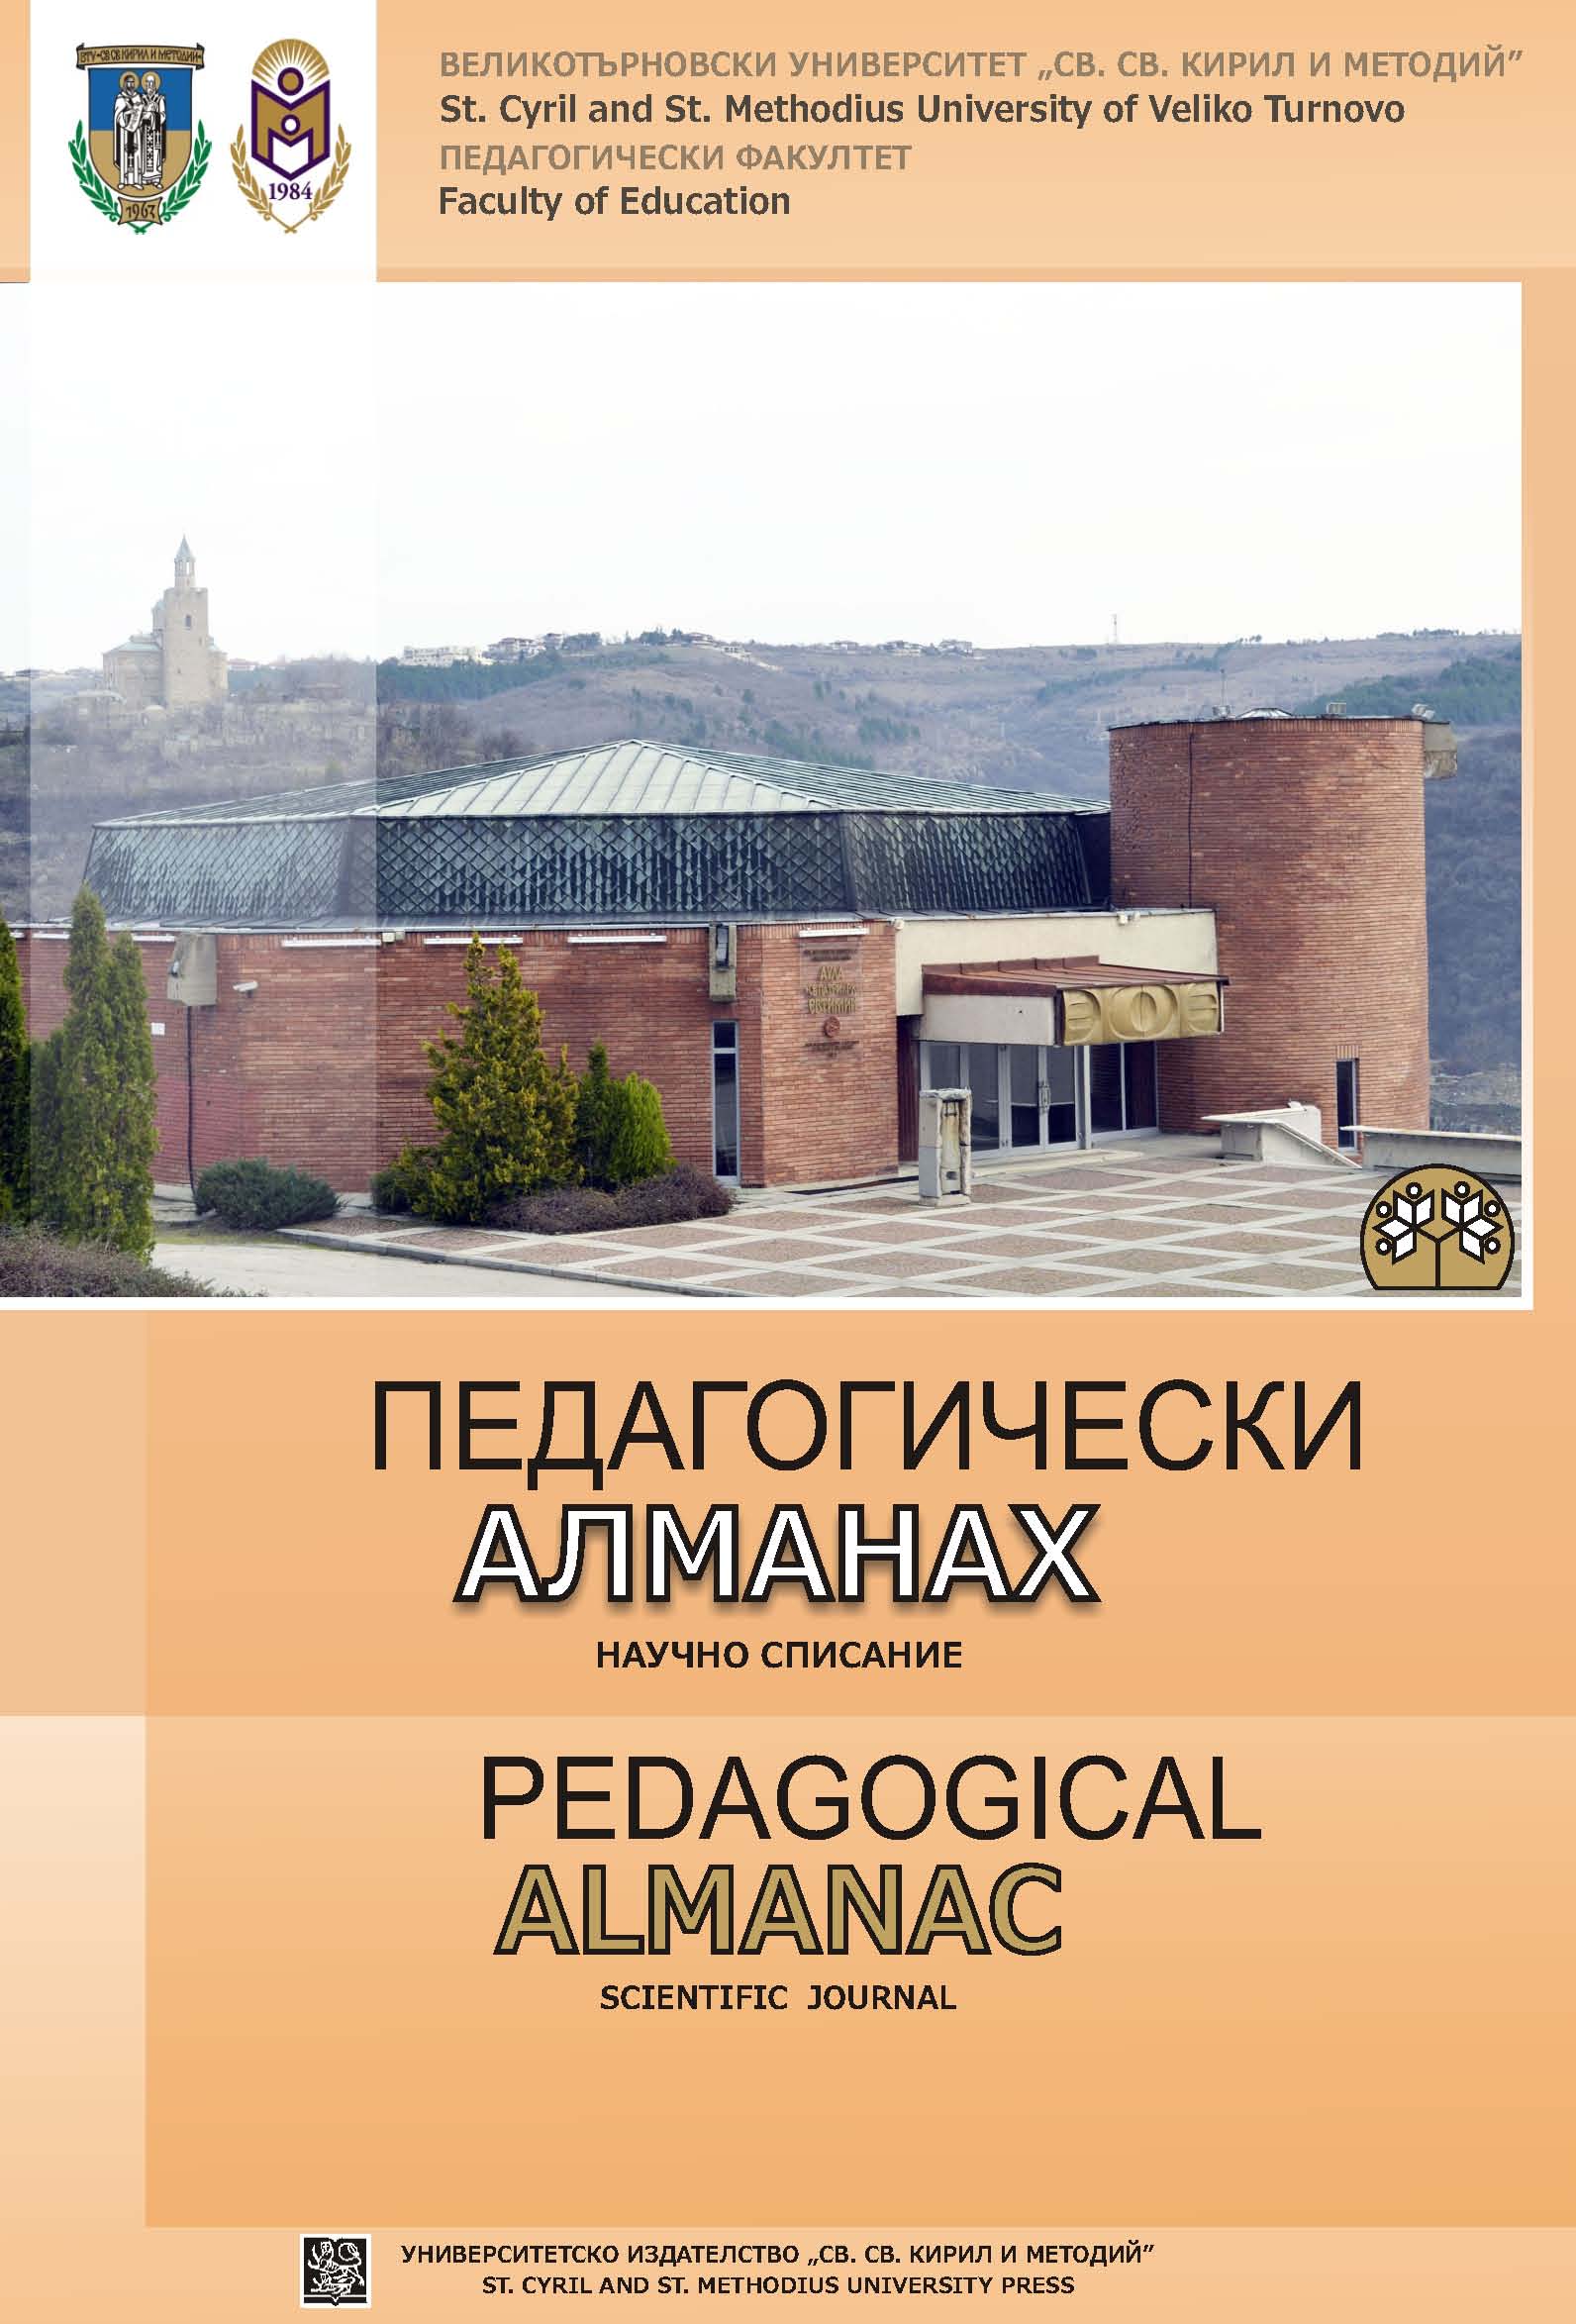 Development of The Information System of The "St. Cyril and St. Methoius" University of Veliko Turnovo Cover Image